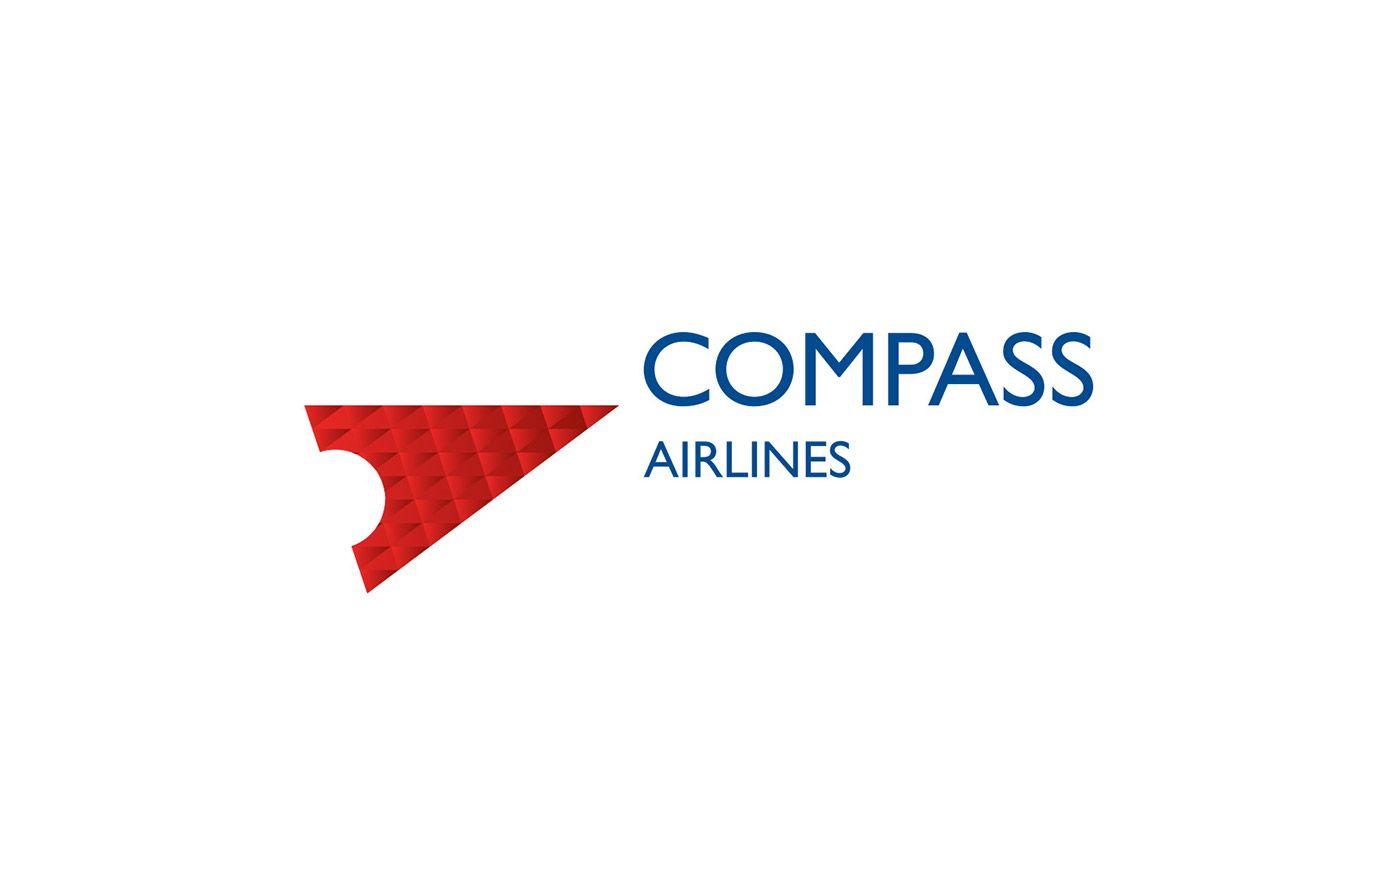 Compass Airlines Logo - Identity Concepts for Airlines on Behance